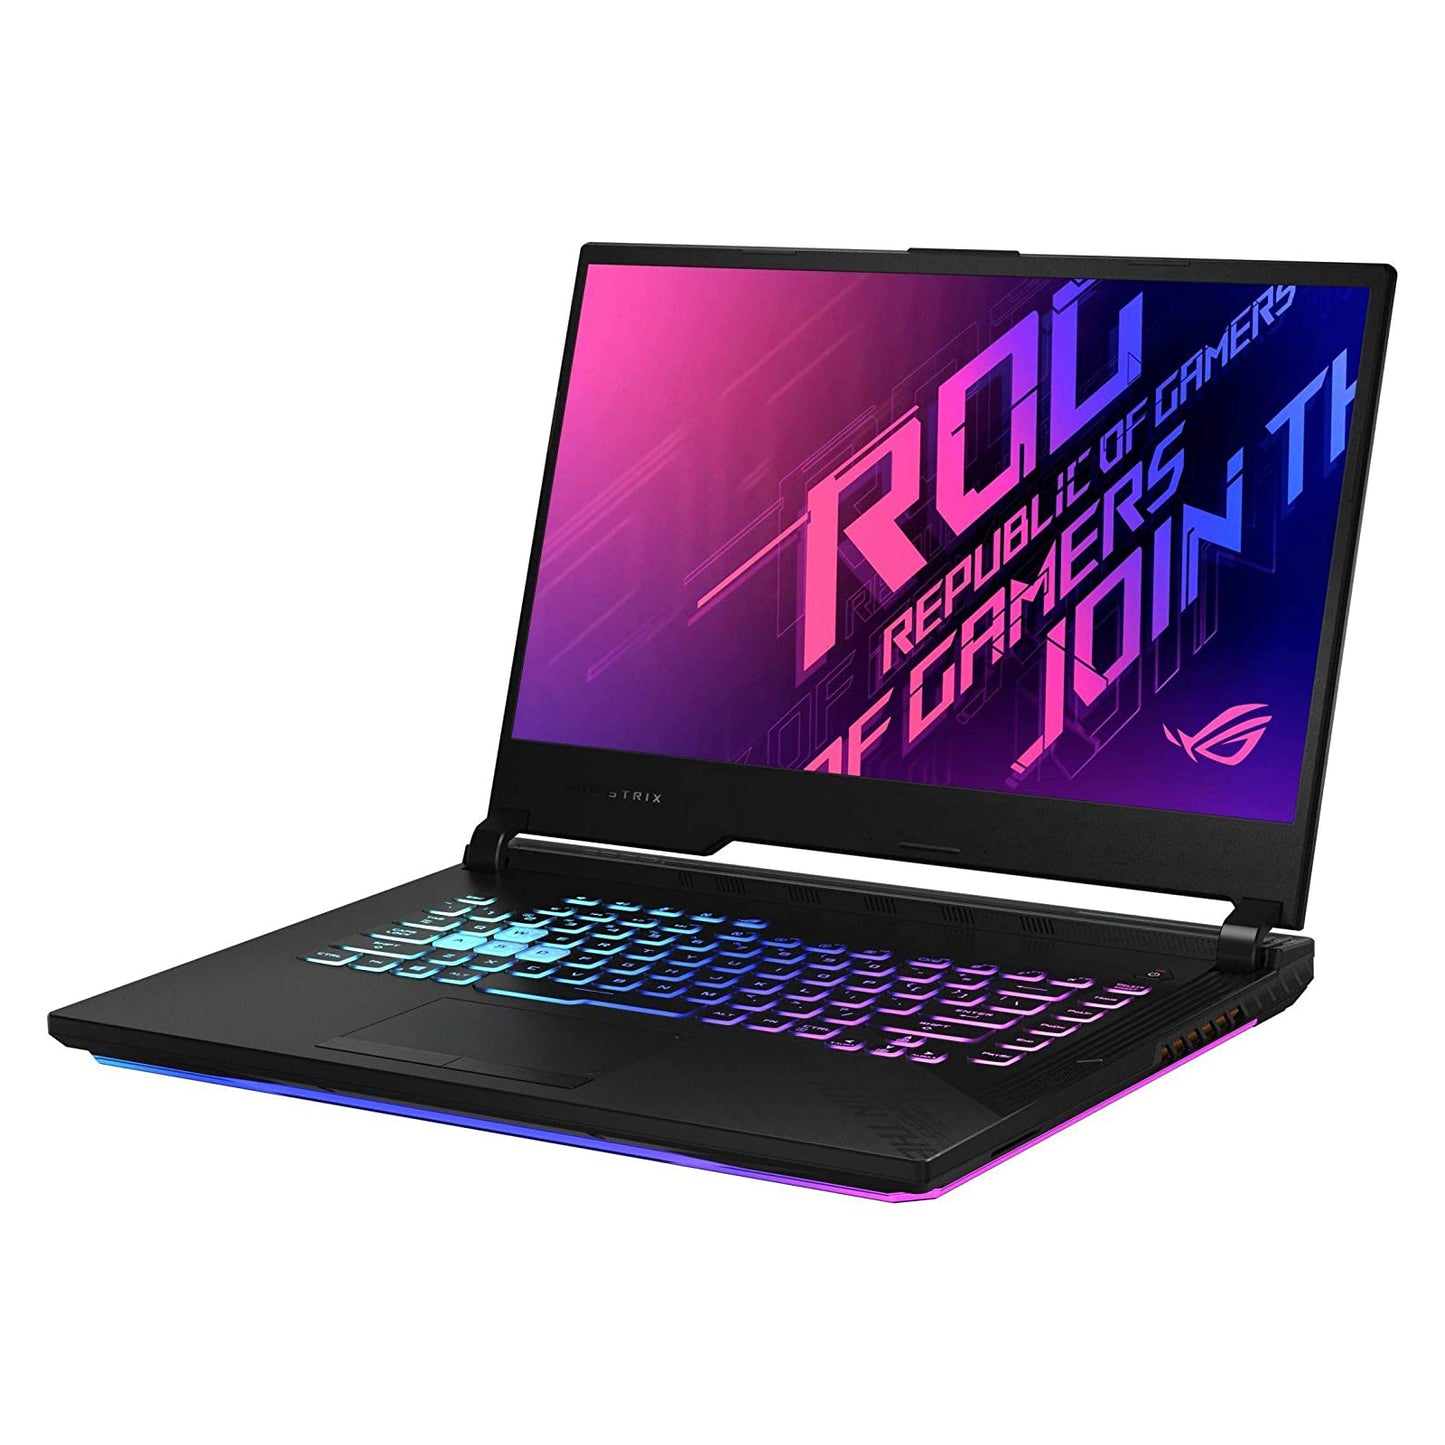 Asus Rog Strix G15 G512LW-WS74 Core i7-10750h Rtx 2070 144hz RGB Gaming Laptop Offers (New OB)